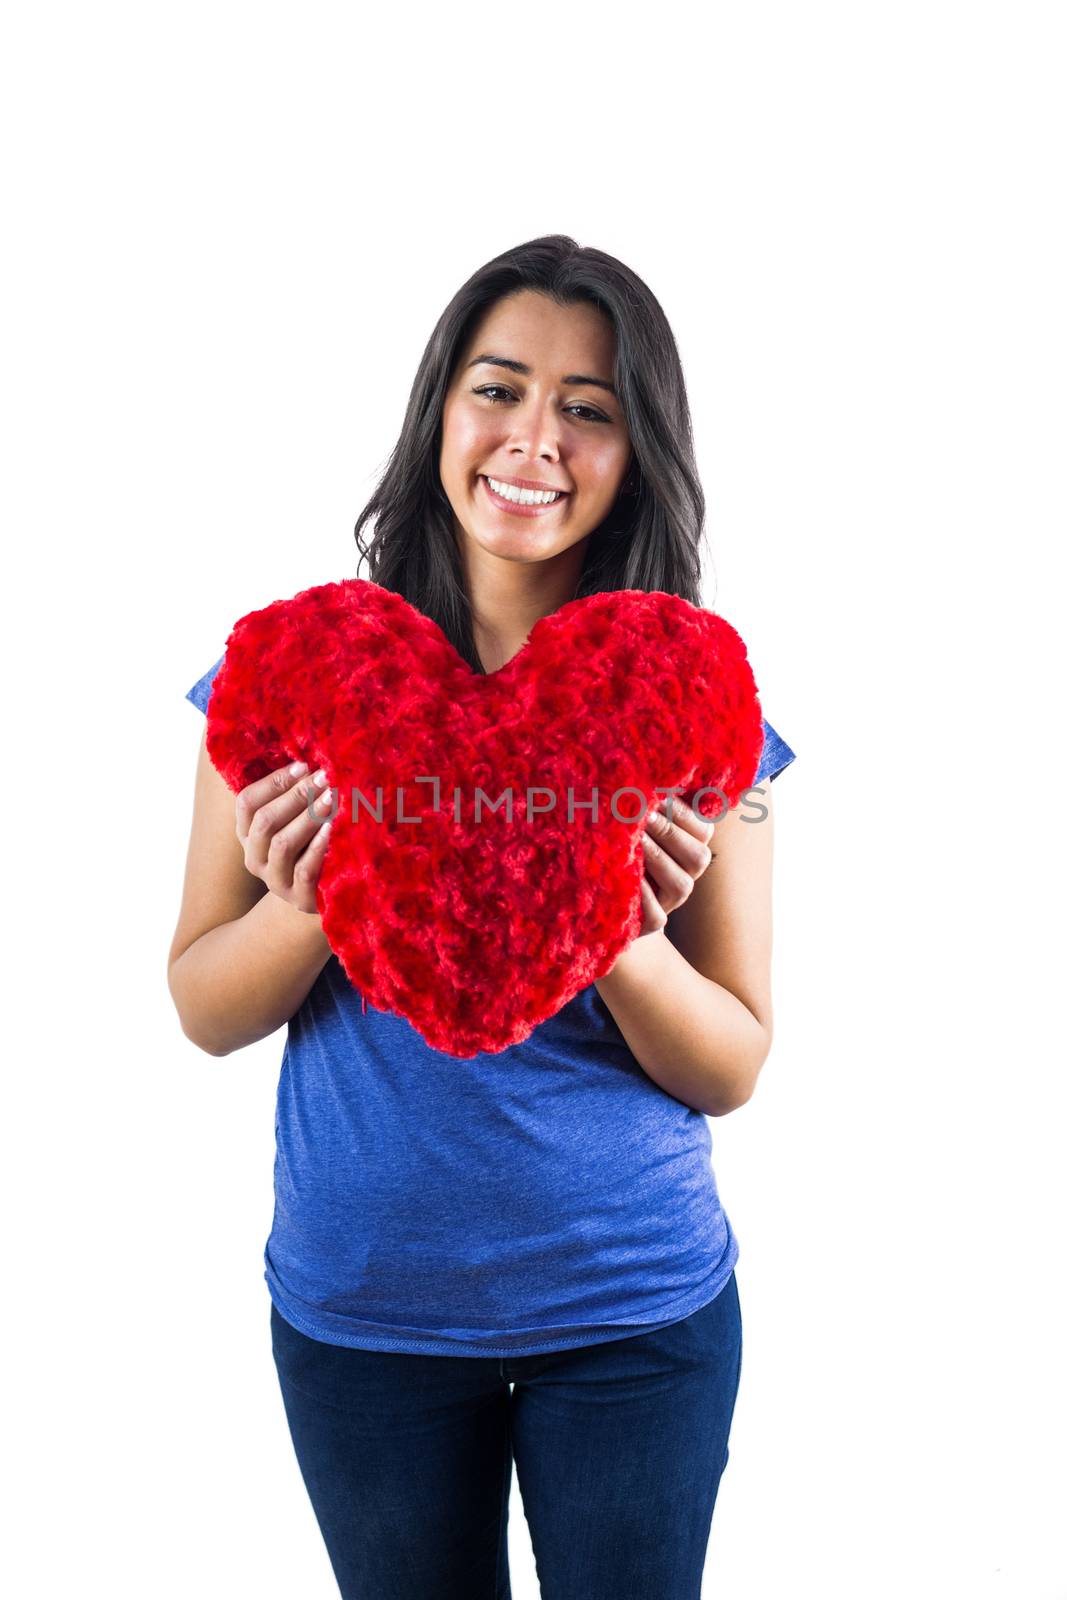 Smiling woman holding a heart shaped pillow by Wavebreakmedia